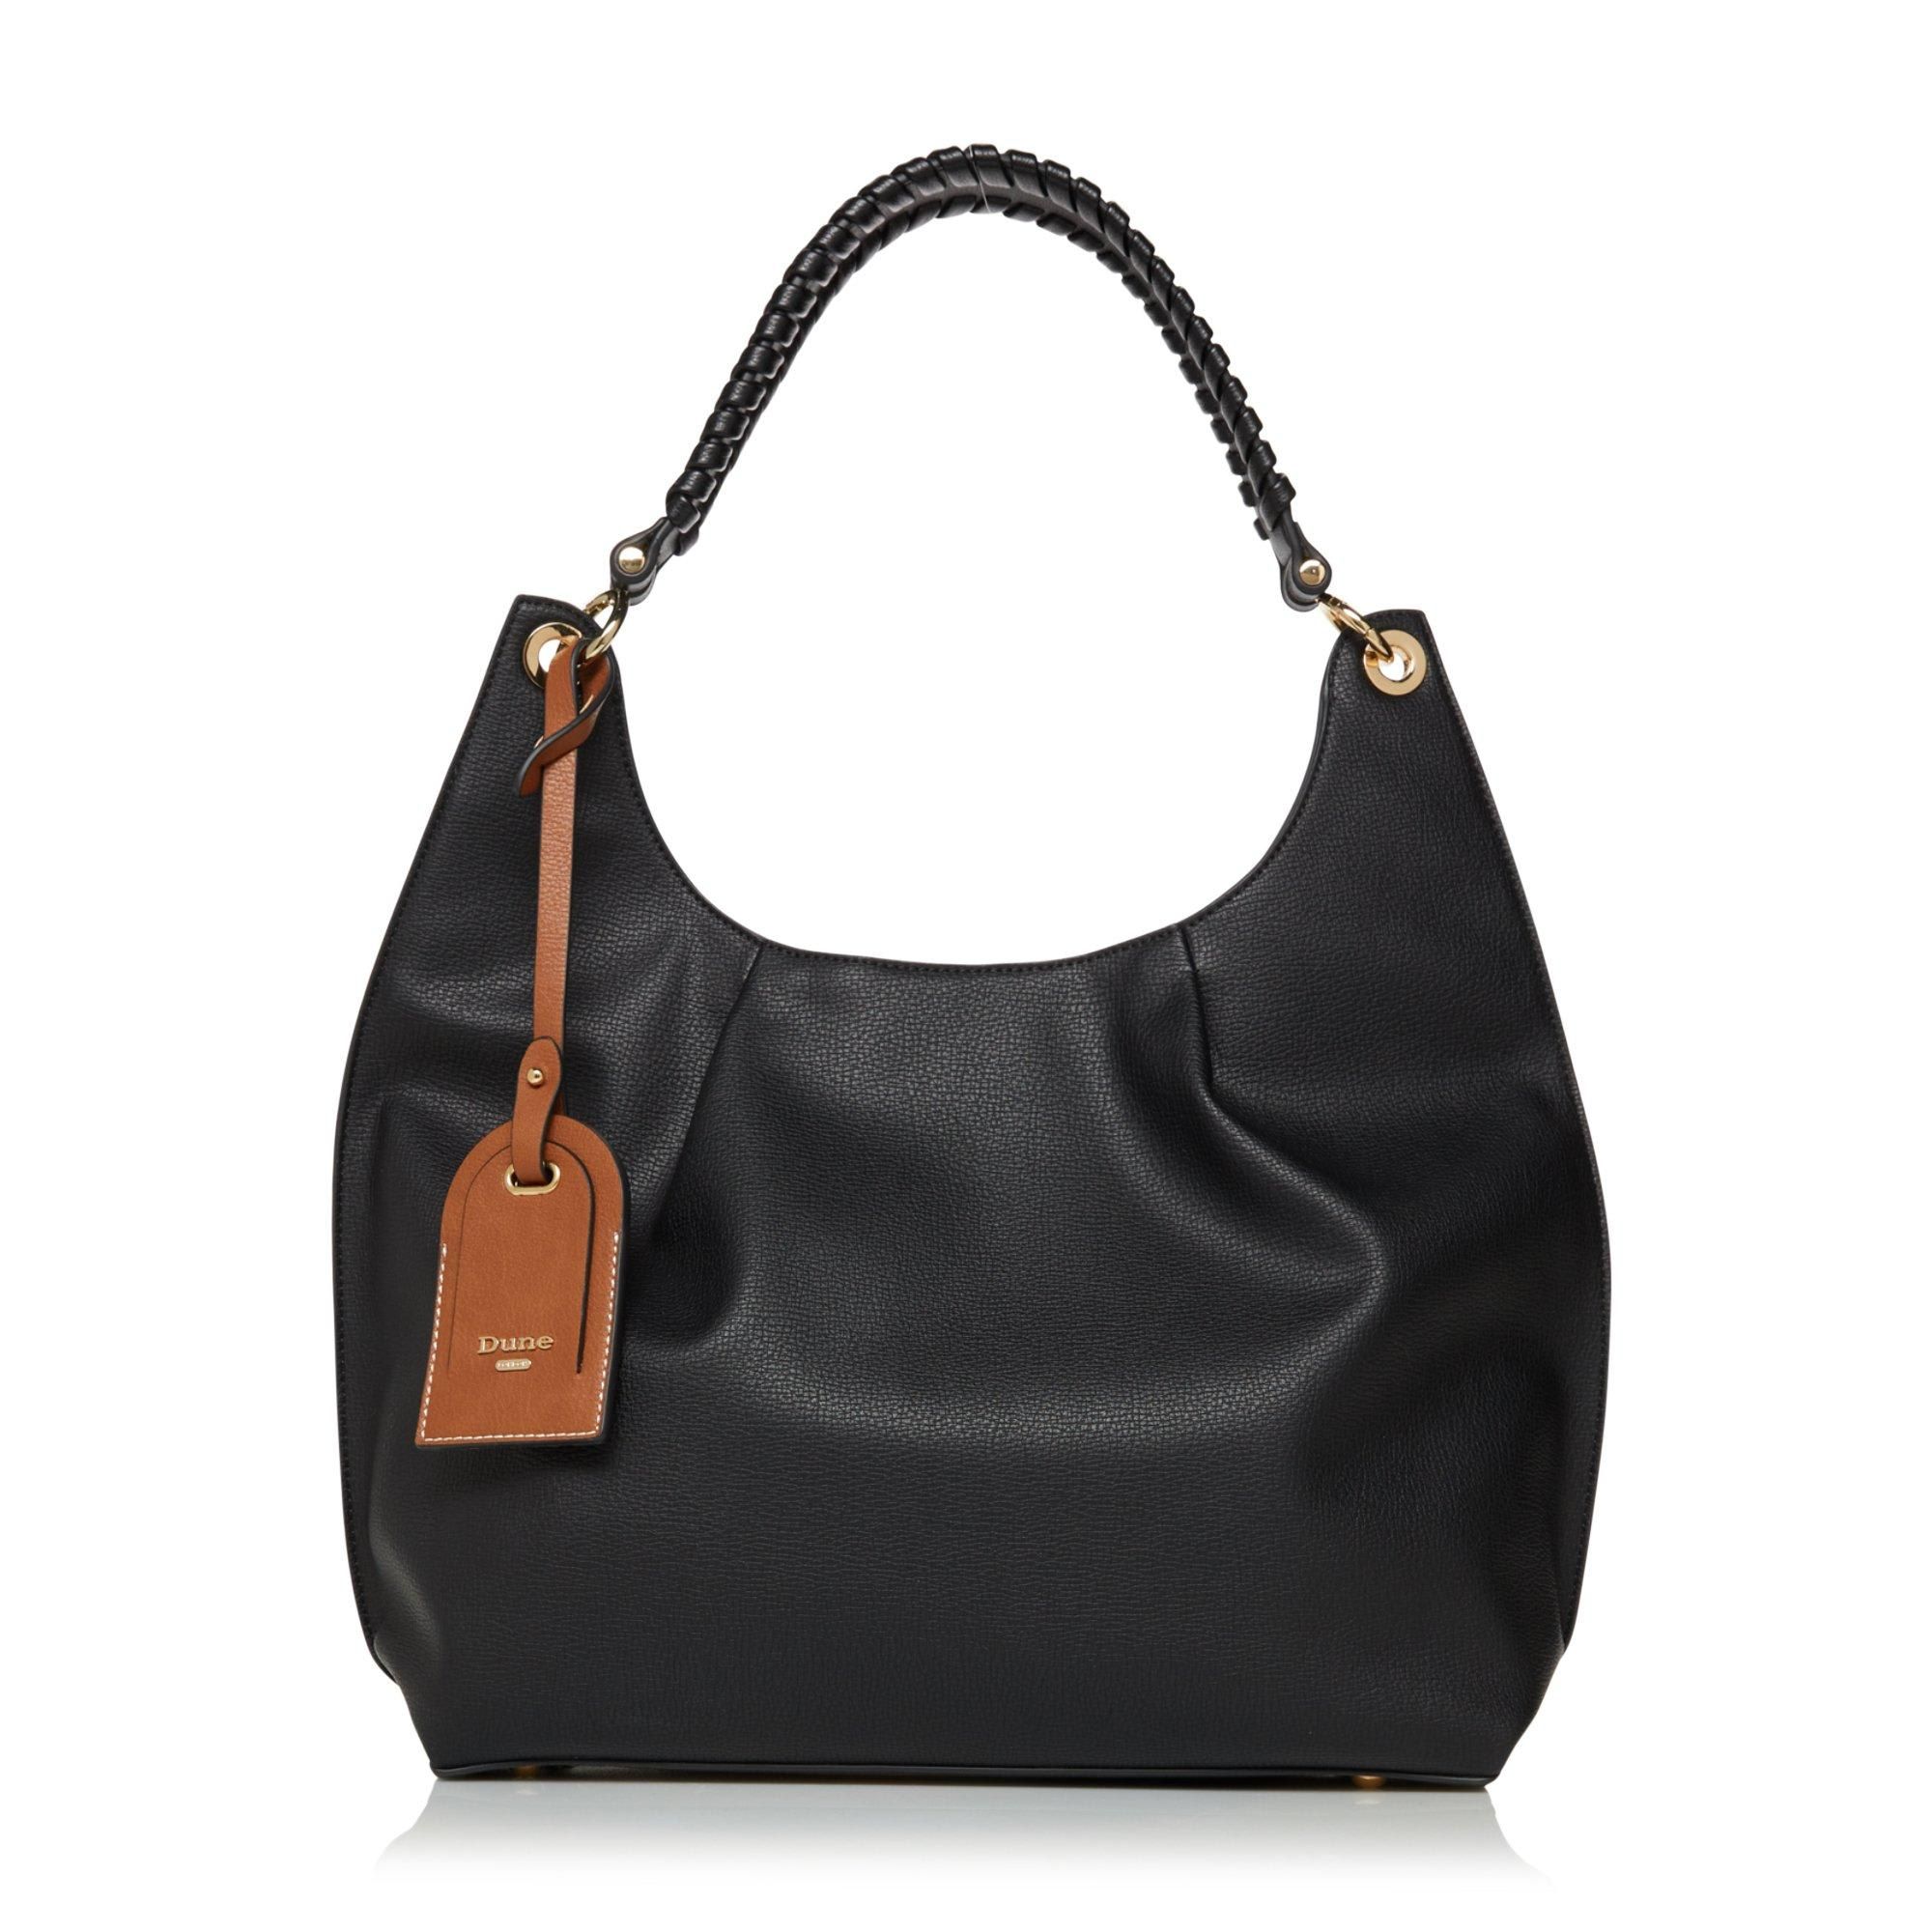 This chic hobo bag is the perfect daytime accessory. Designed in slouchy shape with a braided strap and shiny polished hardware. There's plenty of room inside for things like your phone, keys and wallet.